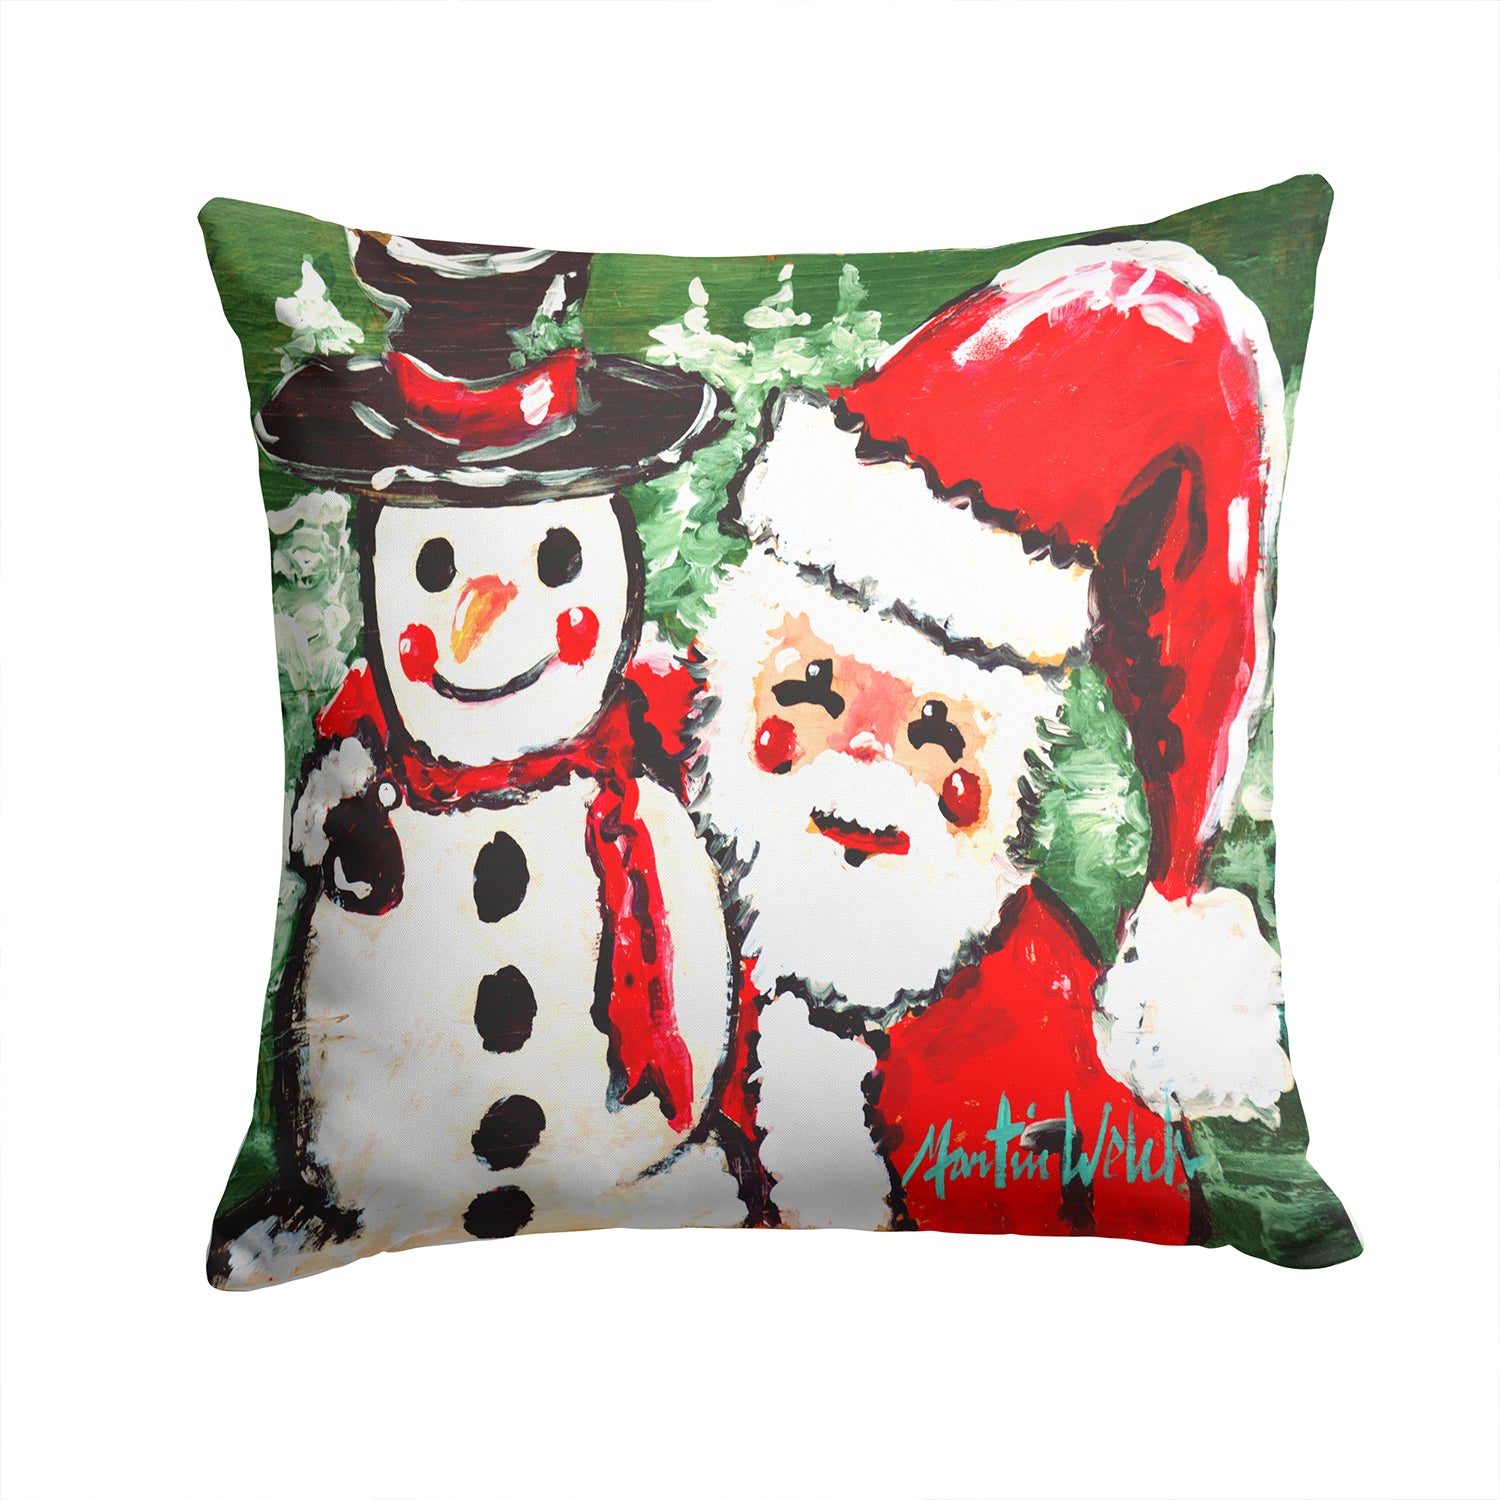 Buy this Friends Snowman and Santa Claus Fabric Decorative Pillow